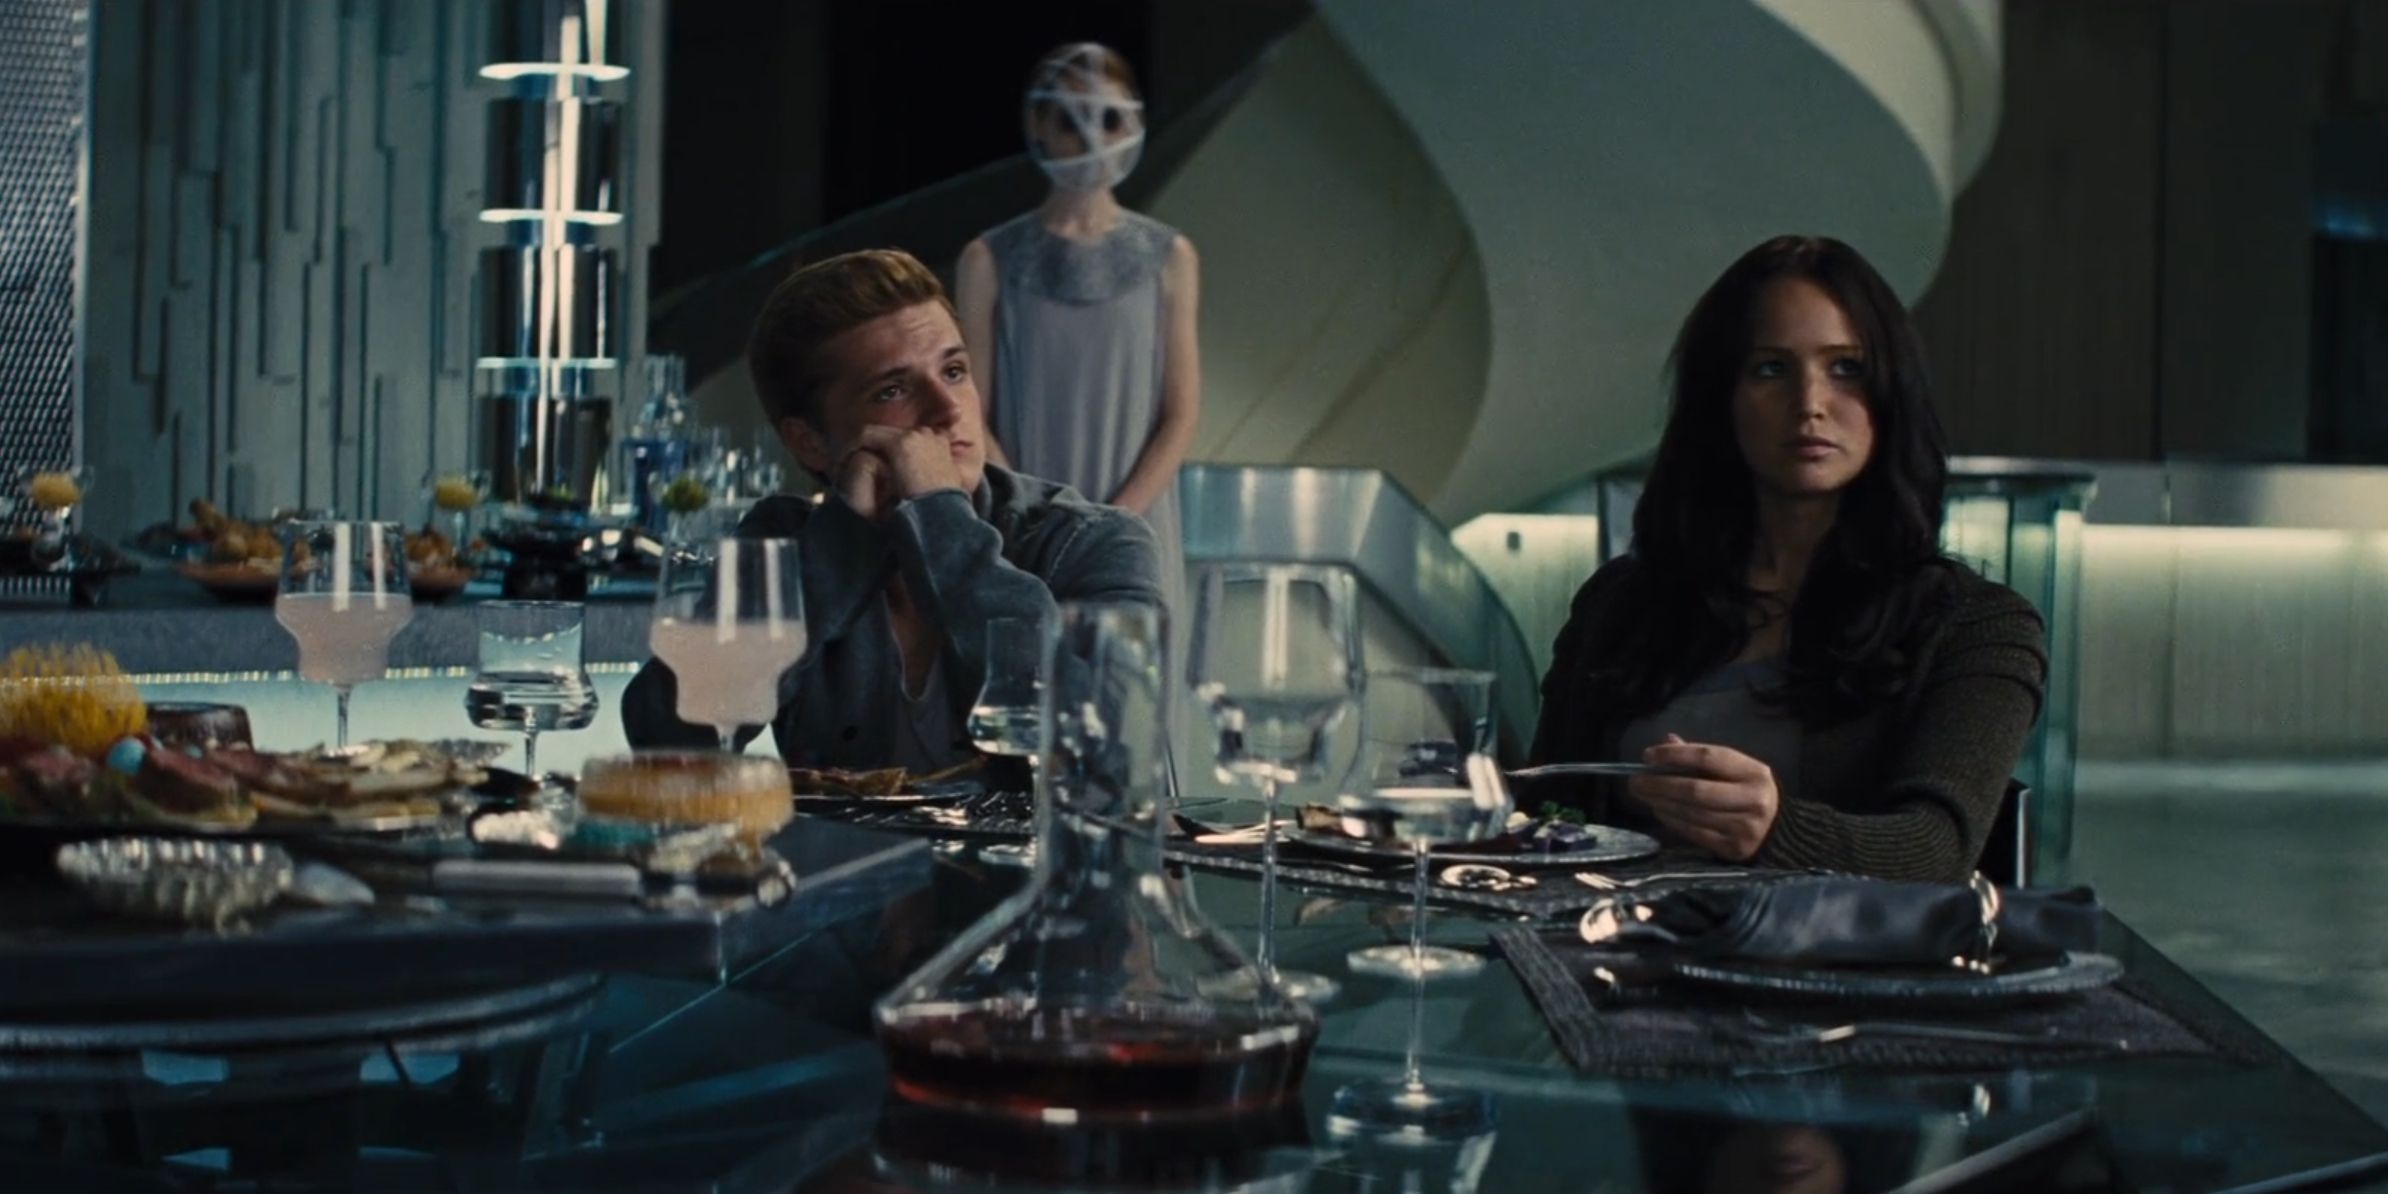 Avox in the background in The Hunger Games: Catching Fire